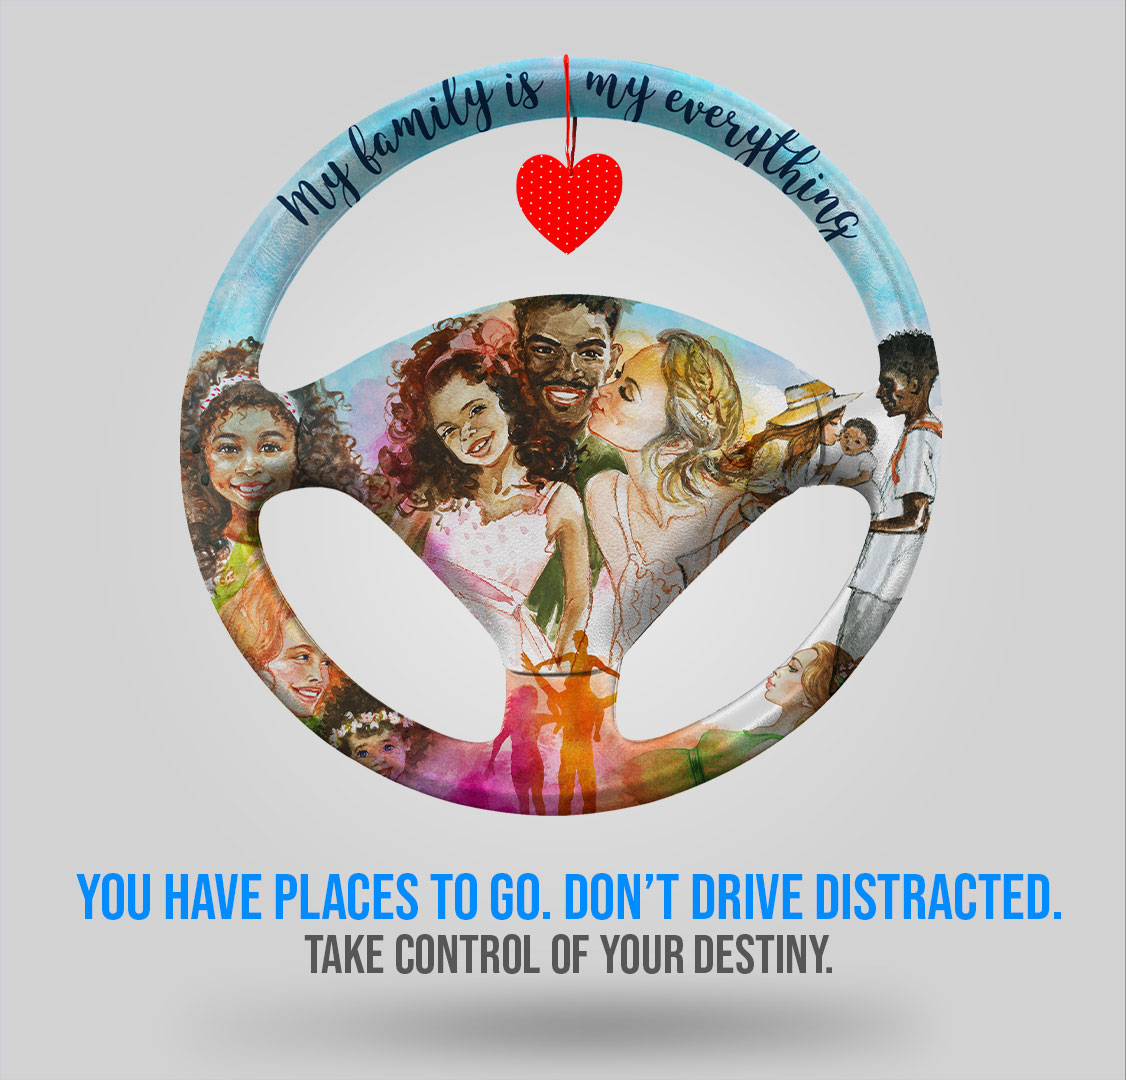 The Marketsmith campaign began during April’s National Distracted Driving Awareness Month. It highlights the dangers of risky behind-the-wheel behaviors like texting, eating and applying makeup.